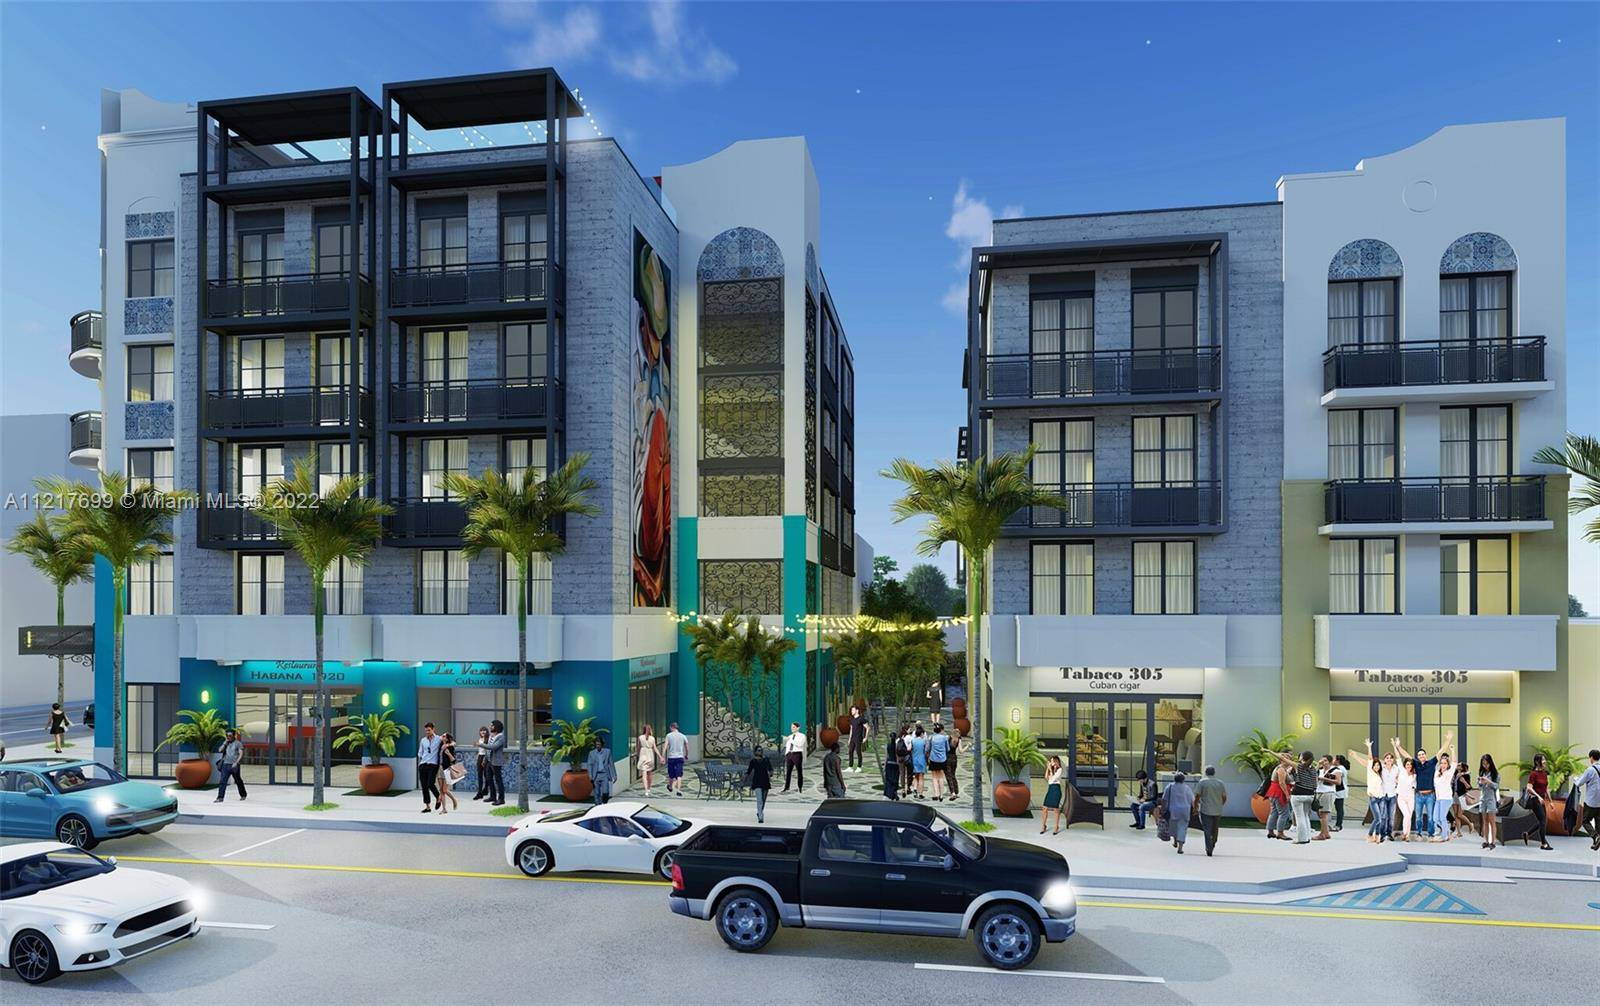 Site Plan Approved mixed use 45 unit life style dev for short or long term rentals 4, 330 SF of retail.